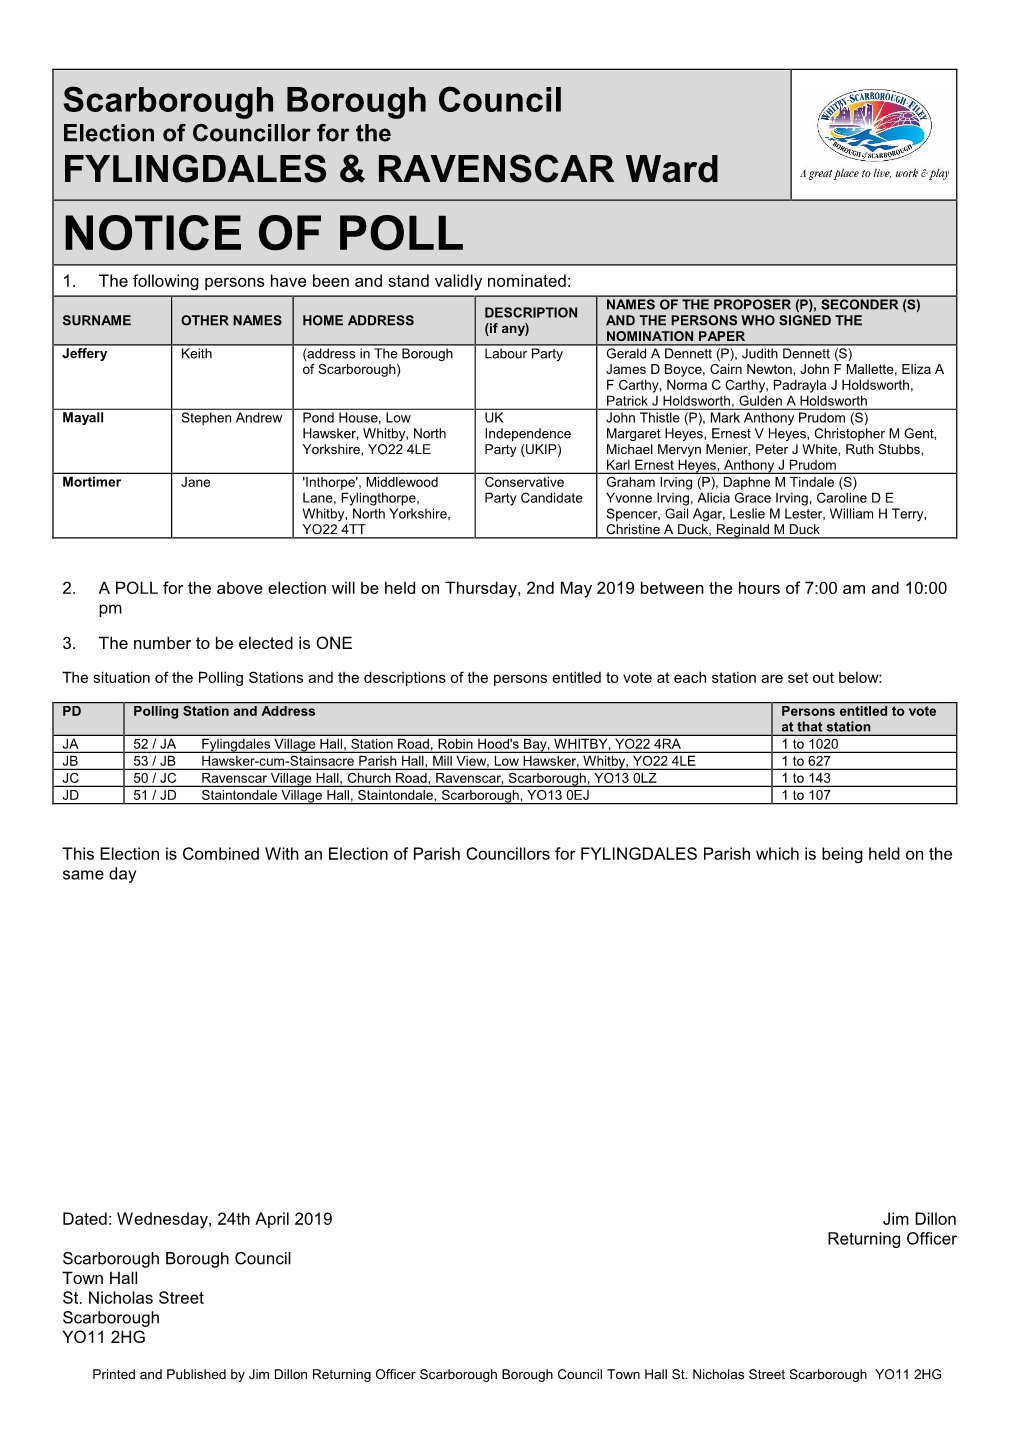 Notice of Poll 1